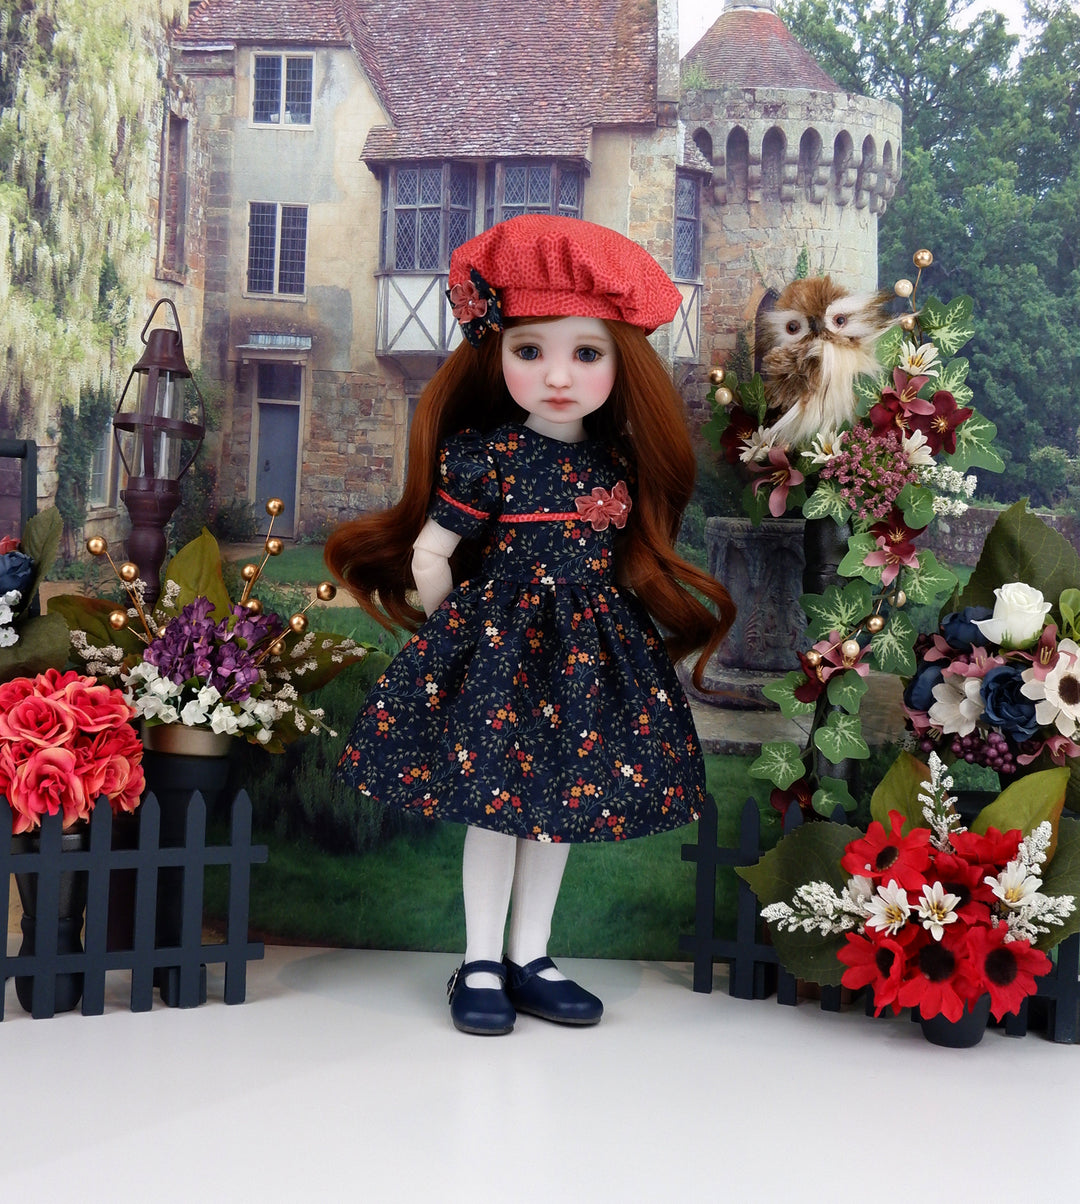 Autumn Manor - dress and shoes for Ruby Red Fashion Friends doll